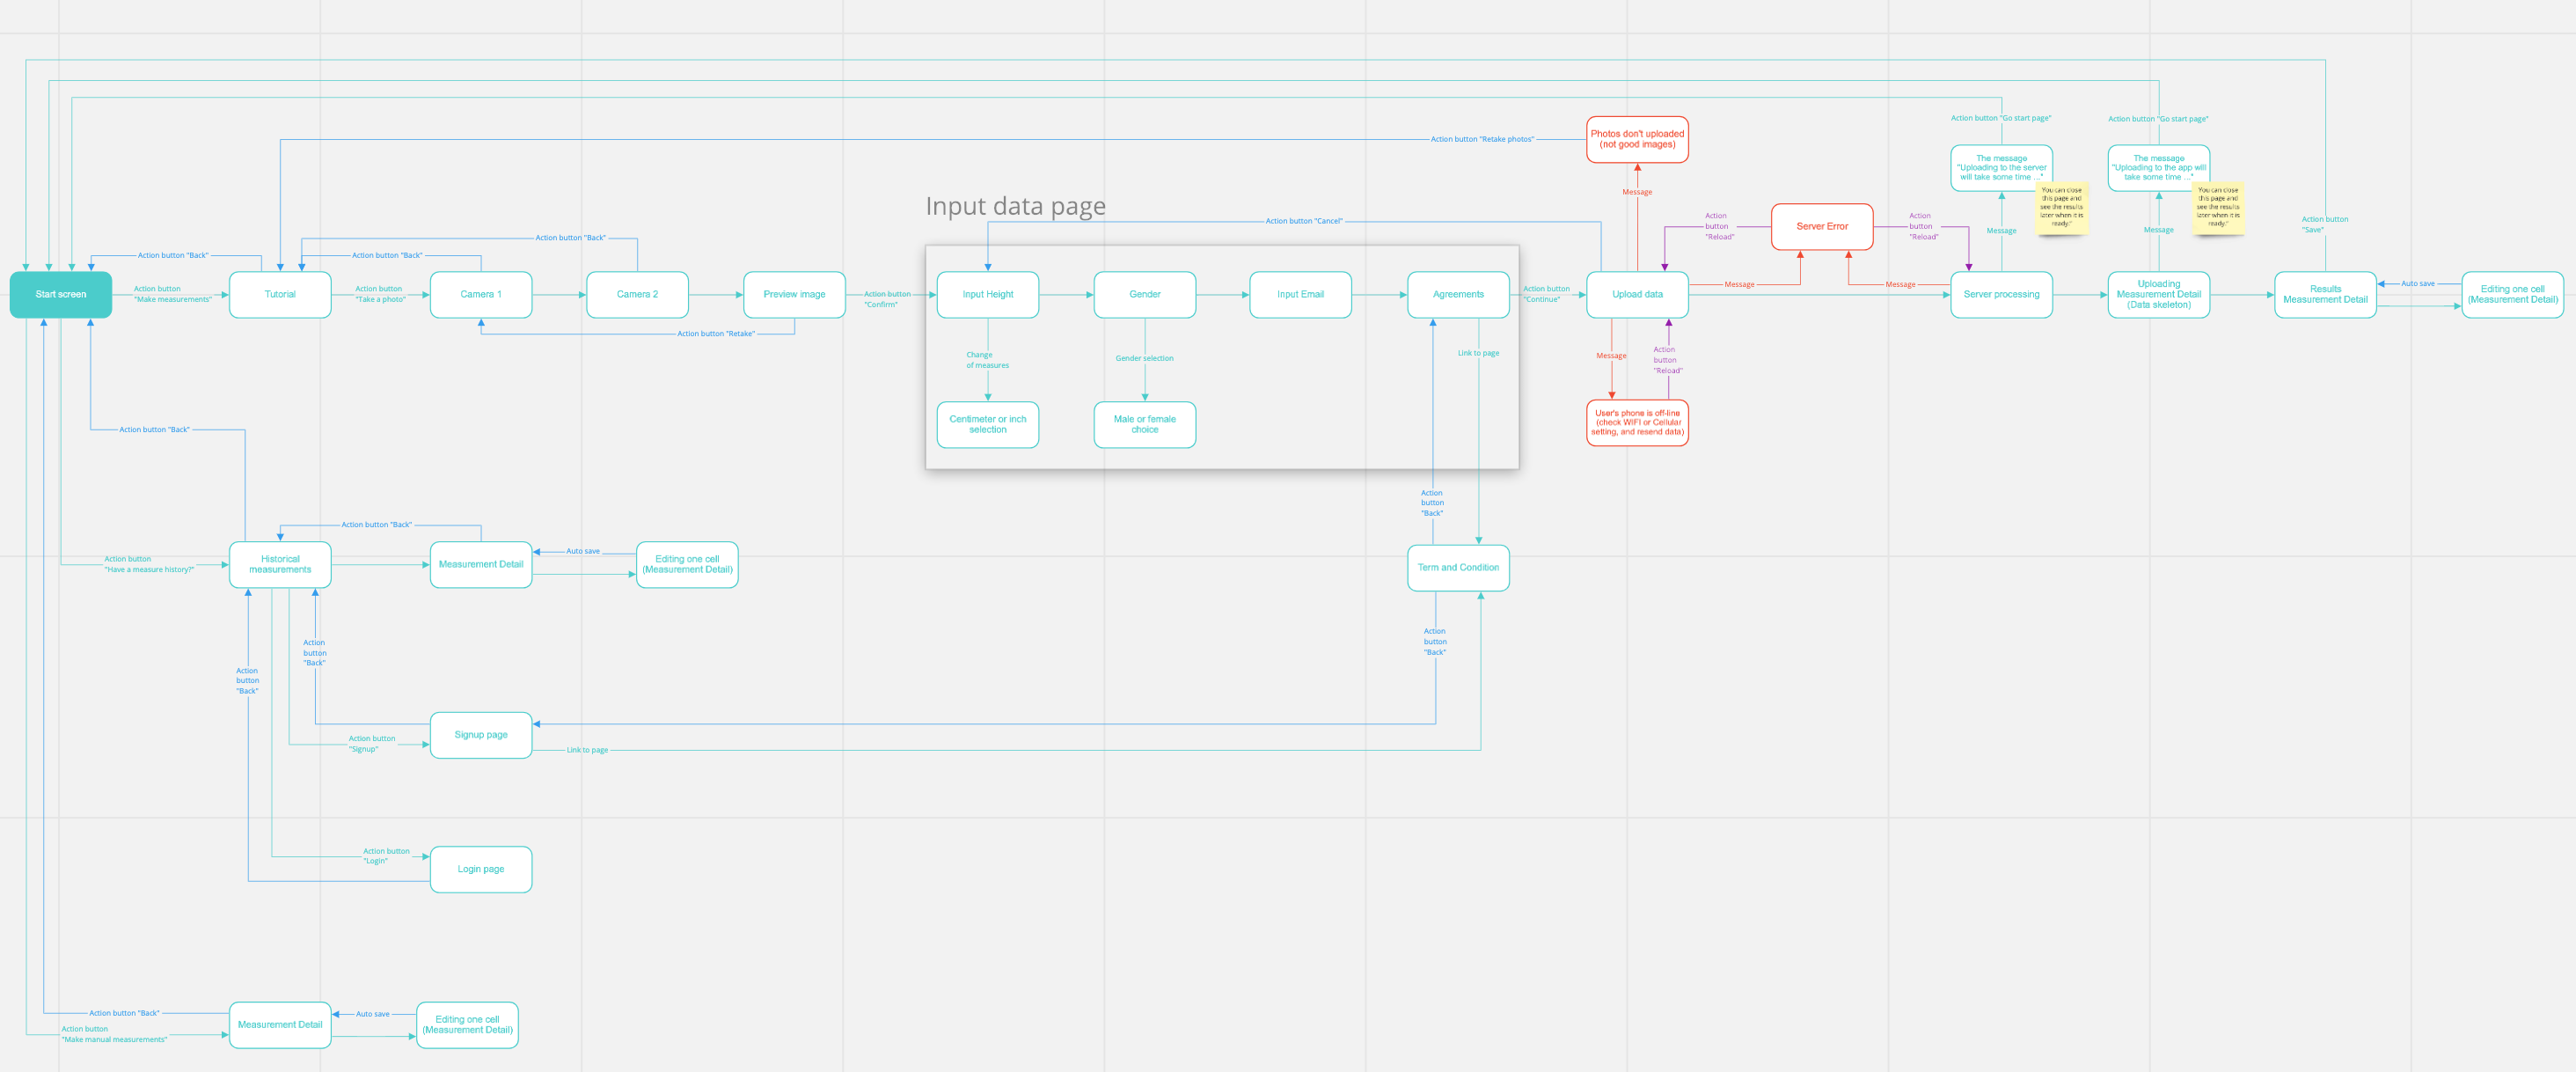 More Detailed Workflow